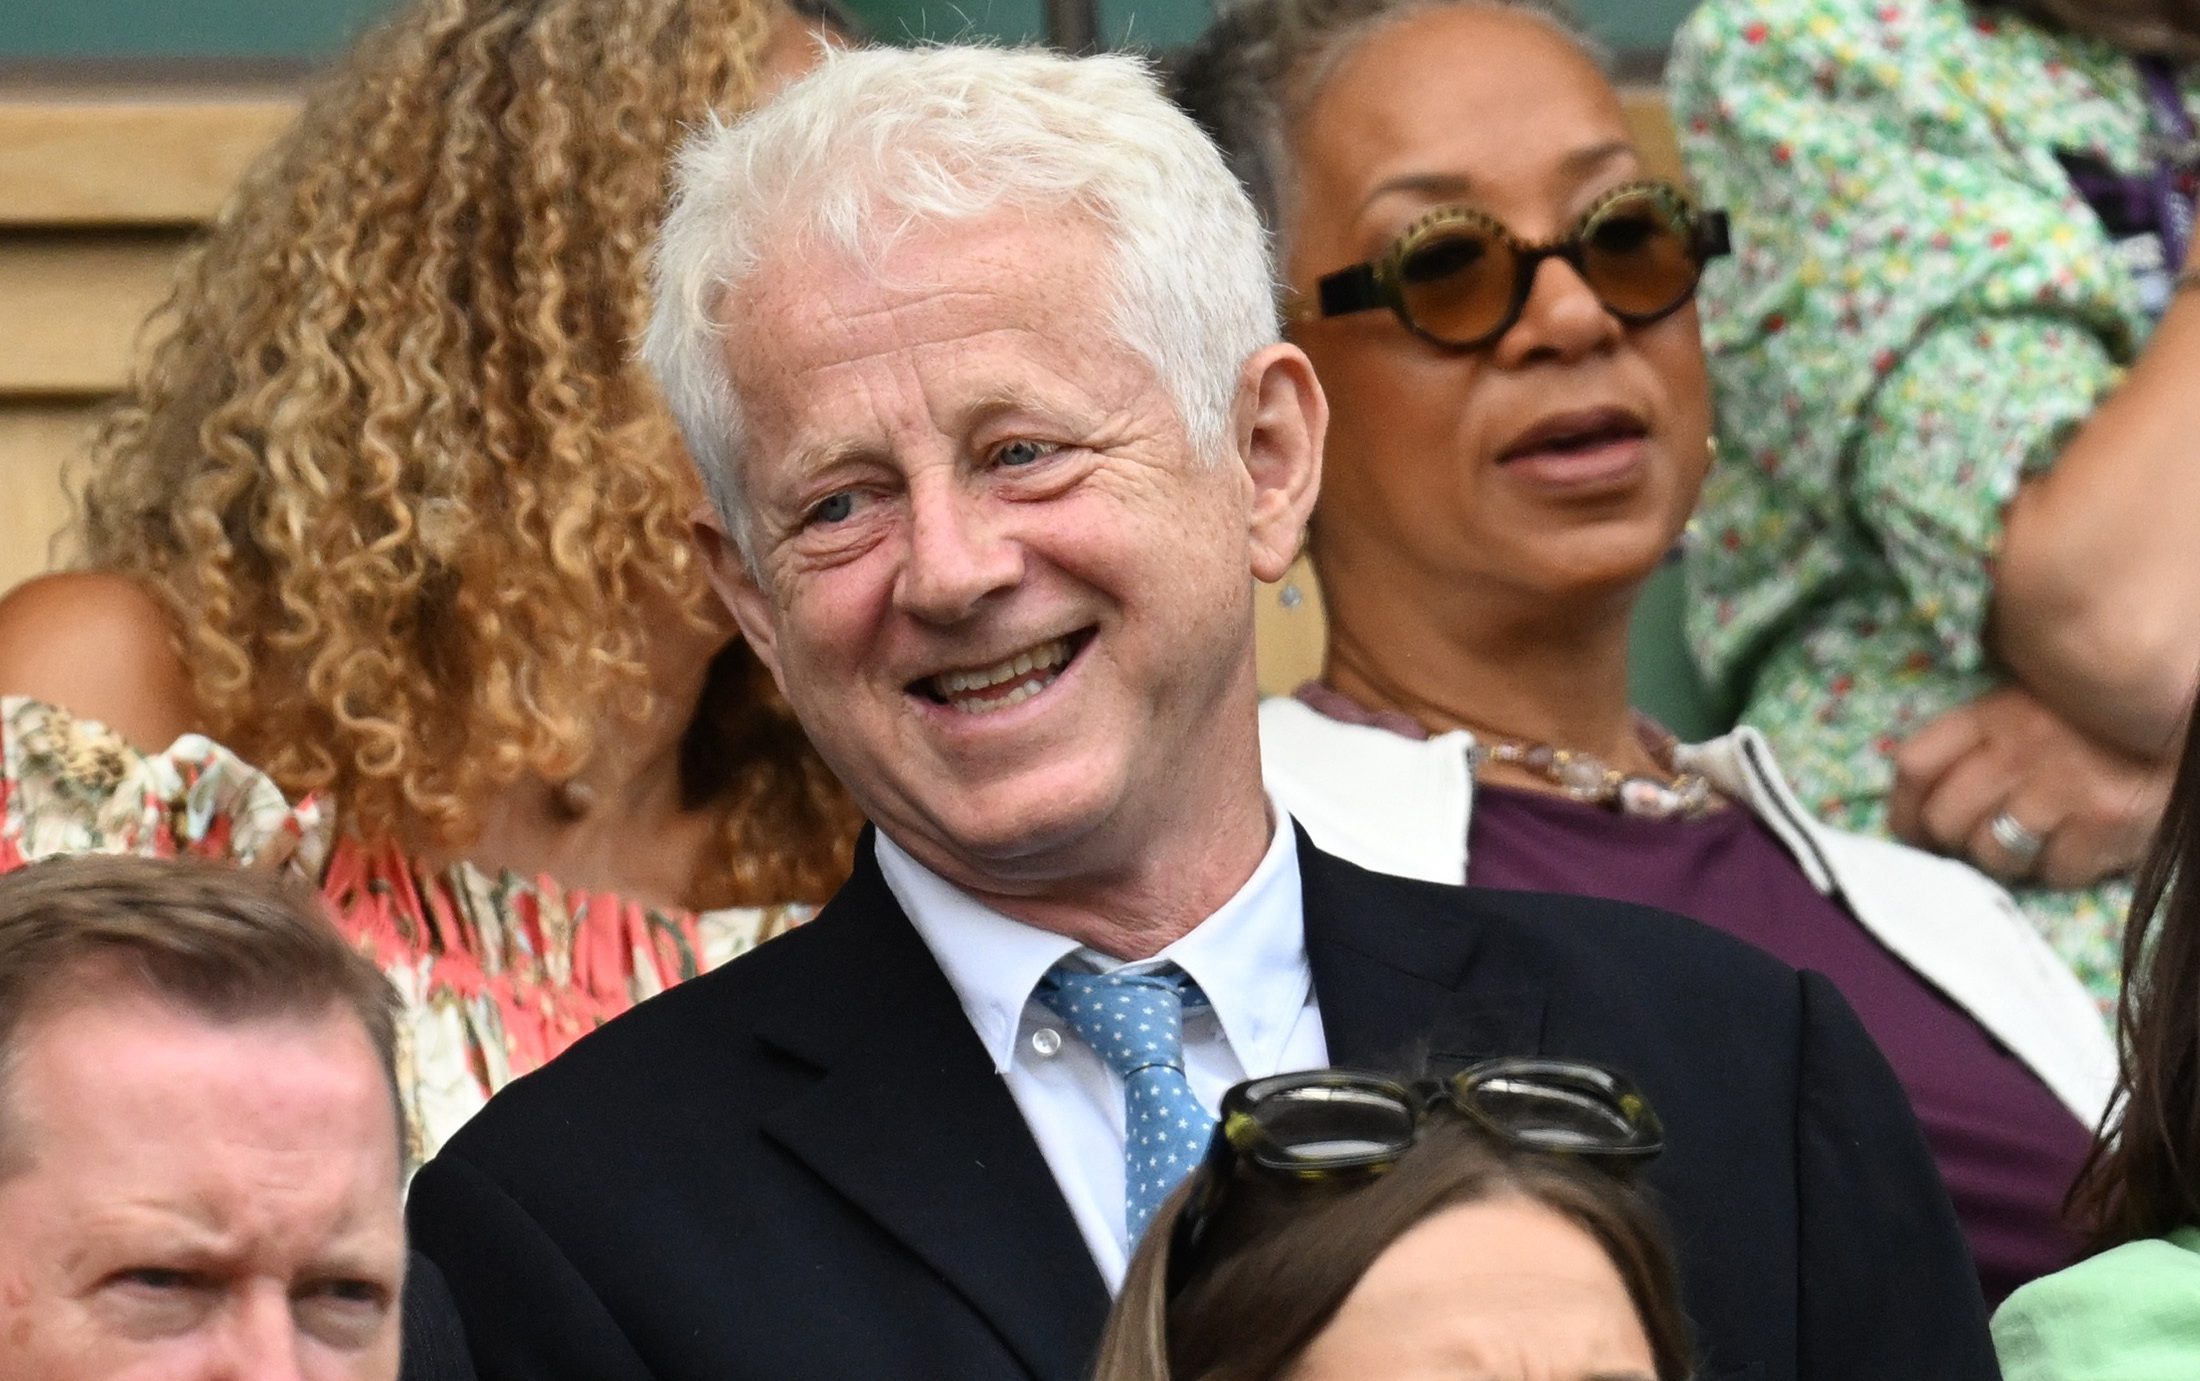 Richard Curtis in Wimbledon royal box days after objecting to Barclays’ sponsorship